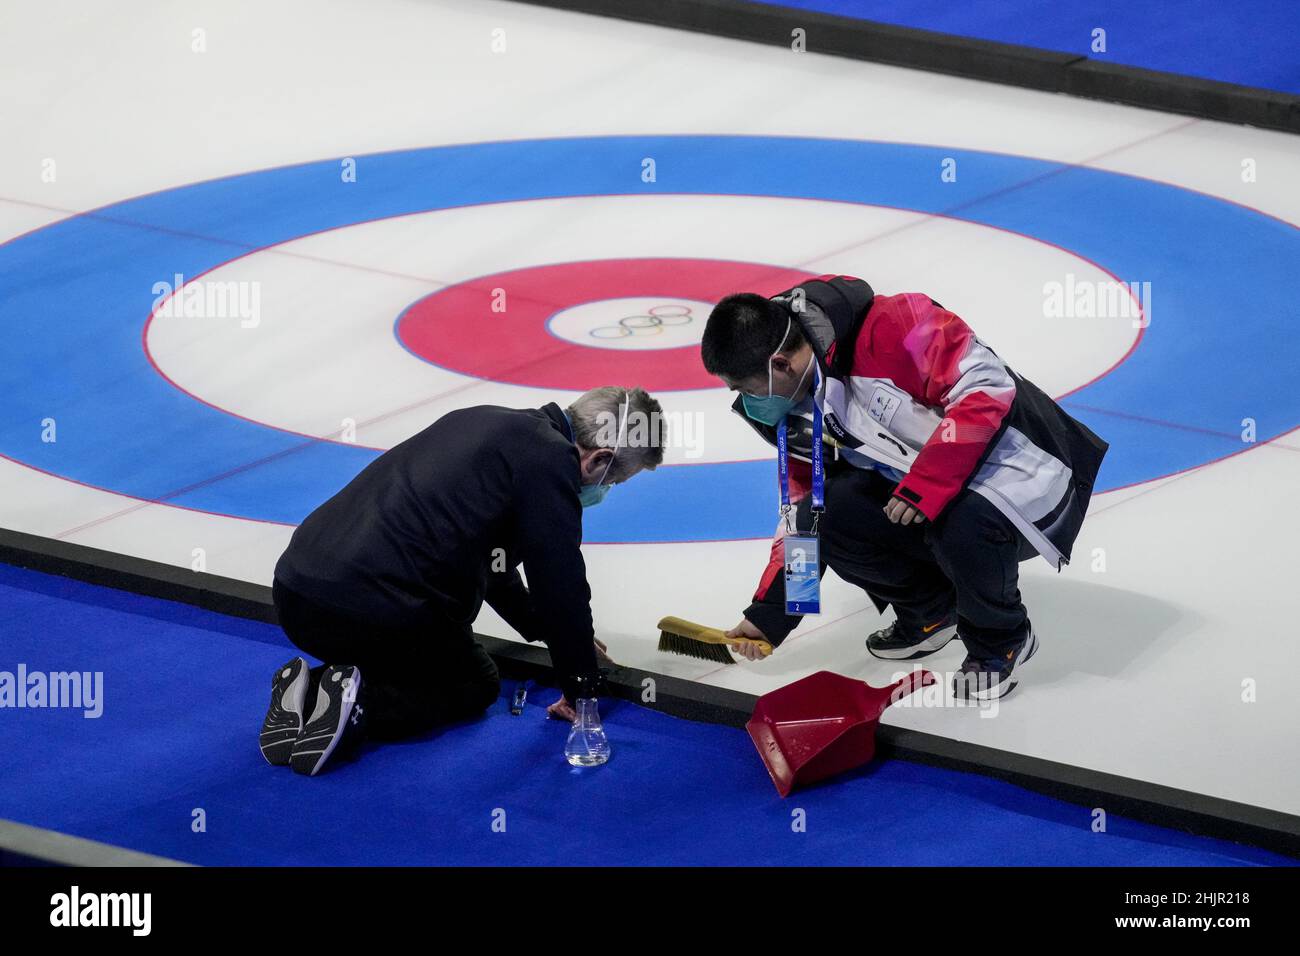 olympic curling 2022 live